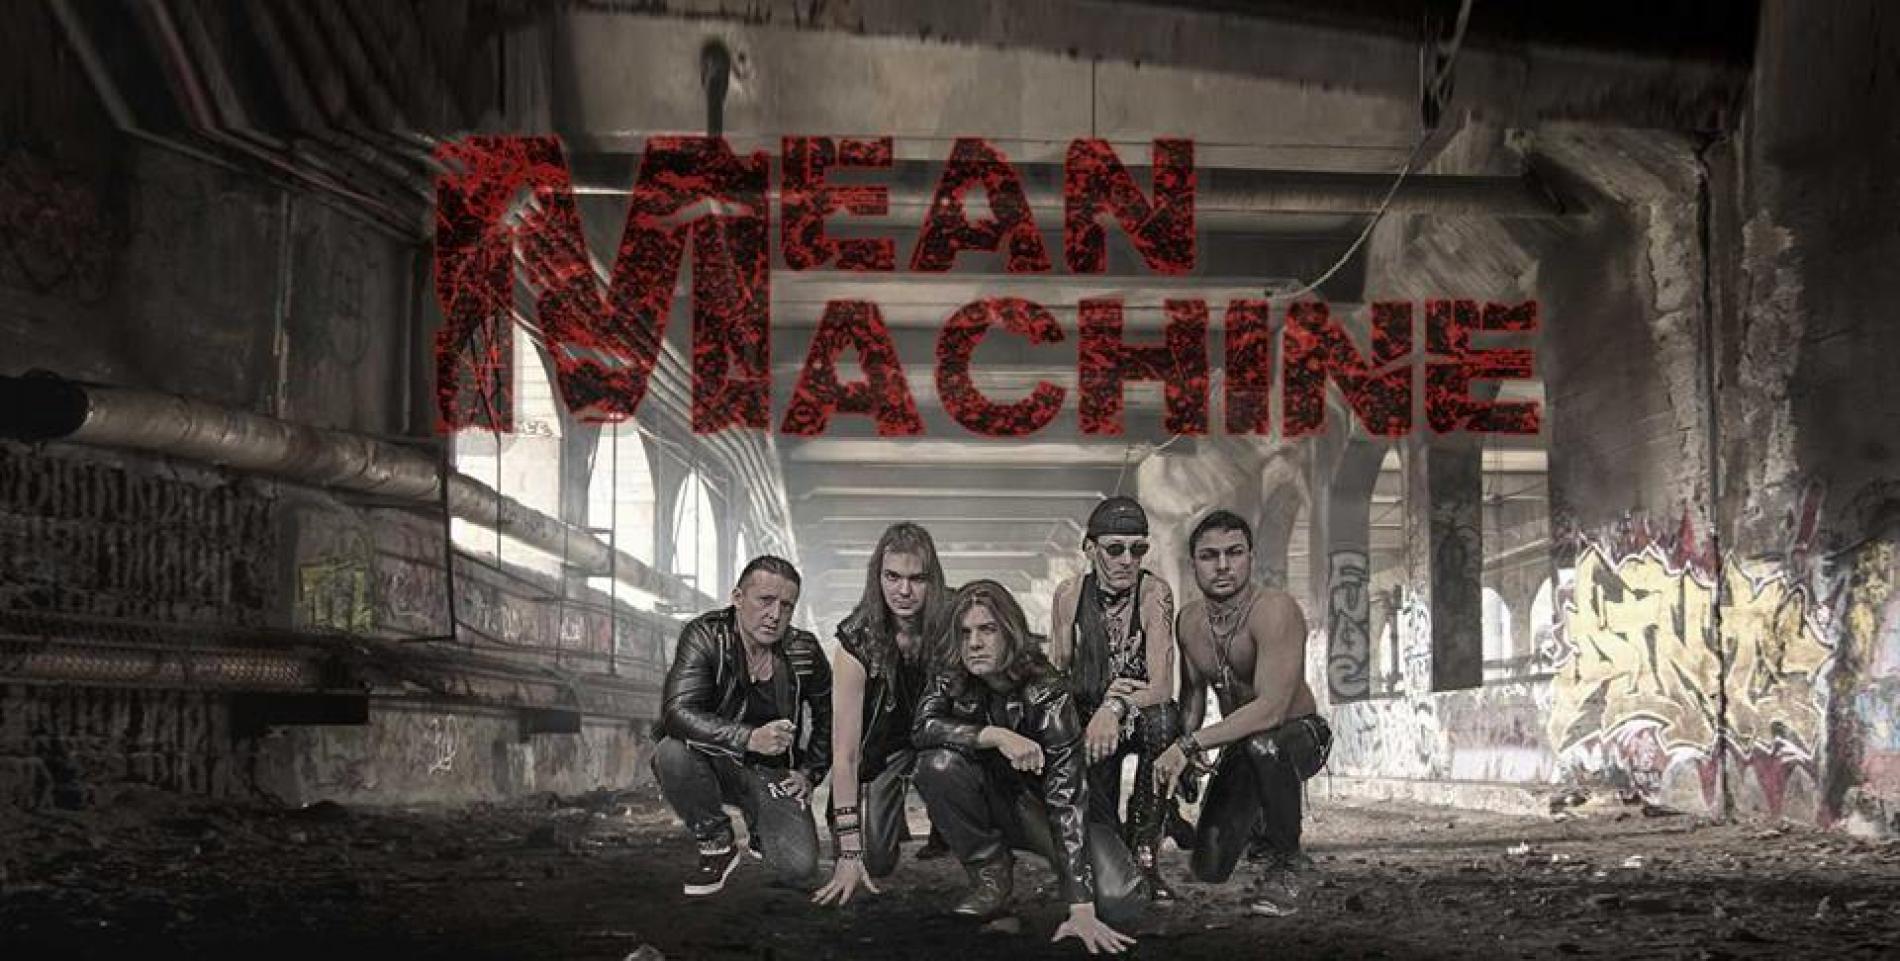 Mean Machine – “Into The Night” (Official Music Video)